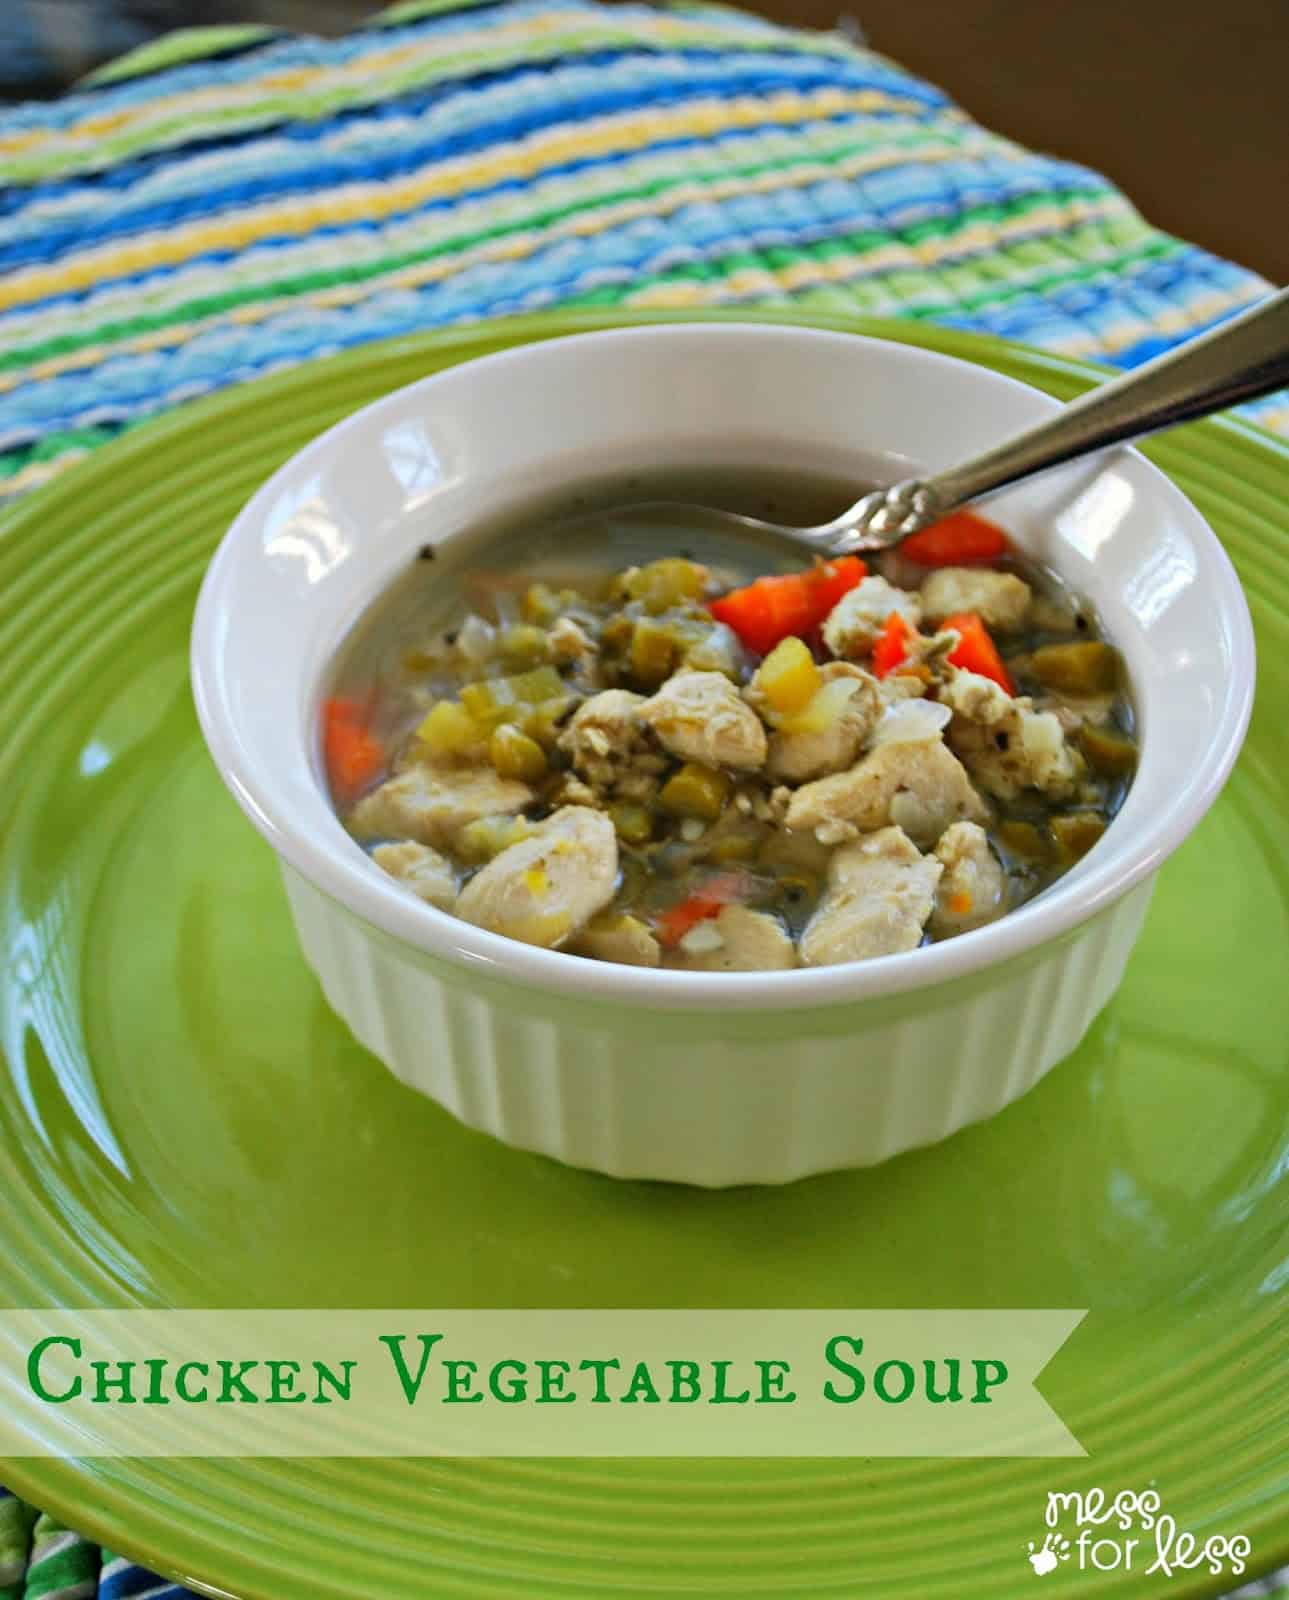 Chicken Vegetable Soup - this filling, low carb soup is great if you are watching your weight.